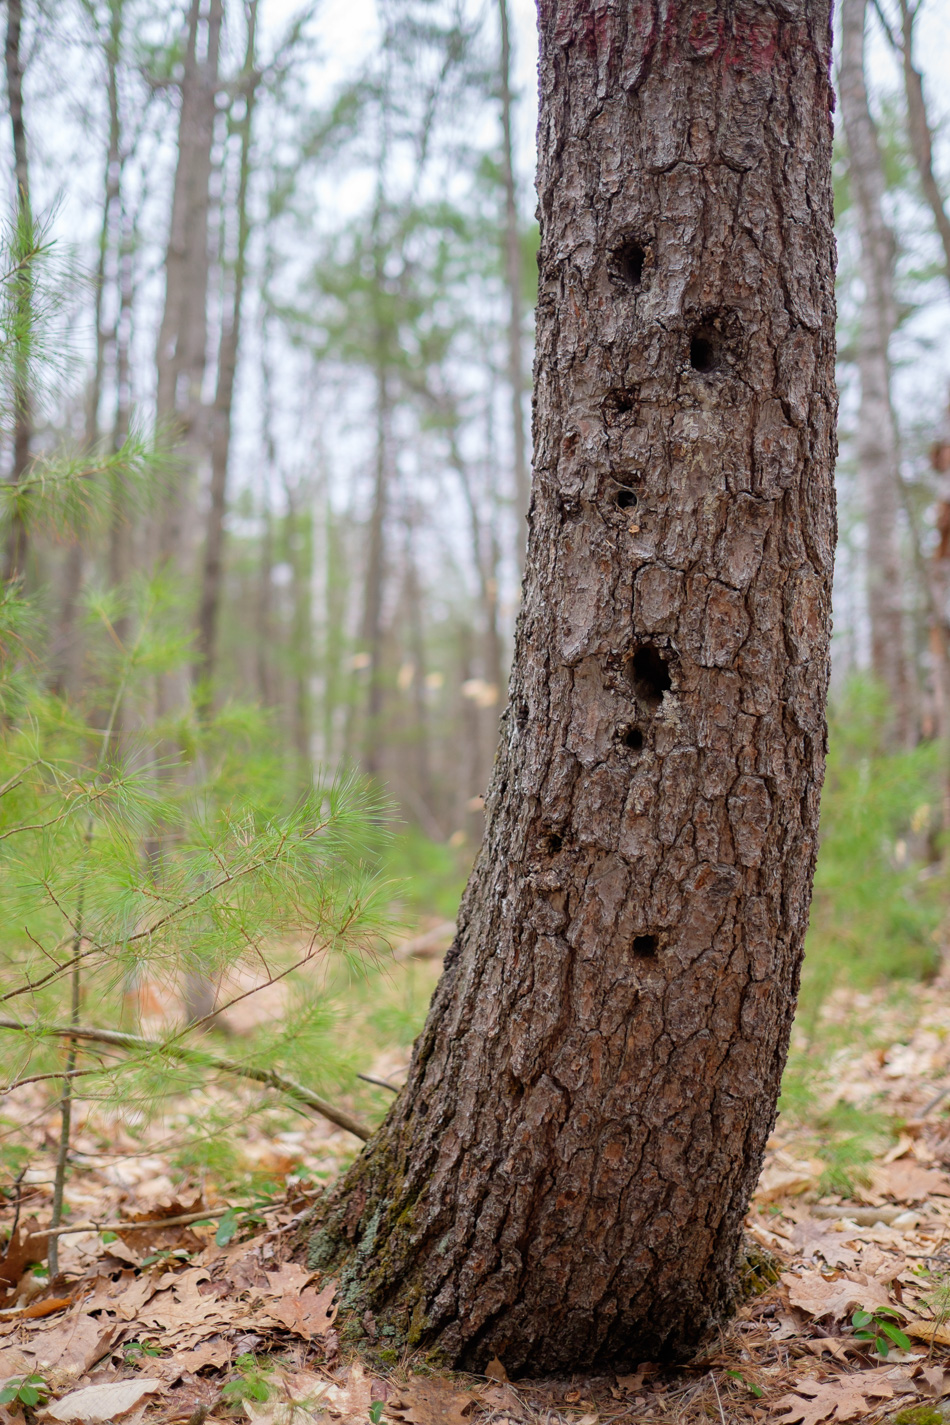 Color photo of a curving tree trunk riddled with holes made by a woodpecker